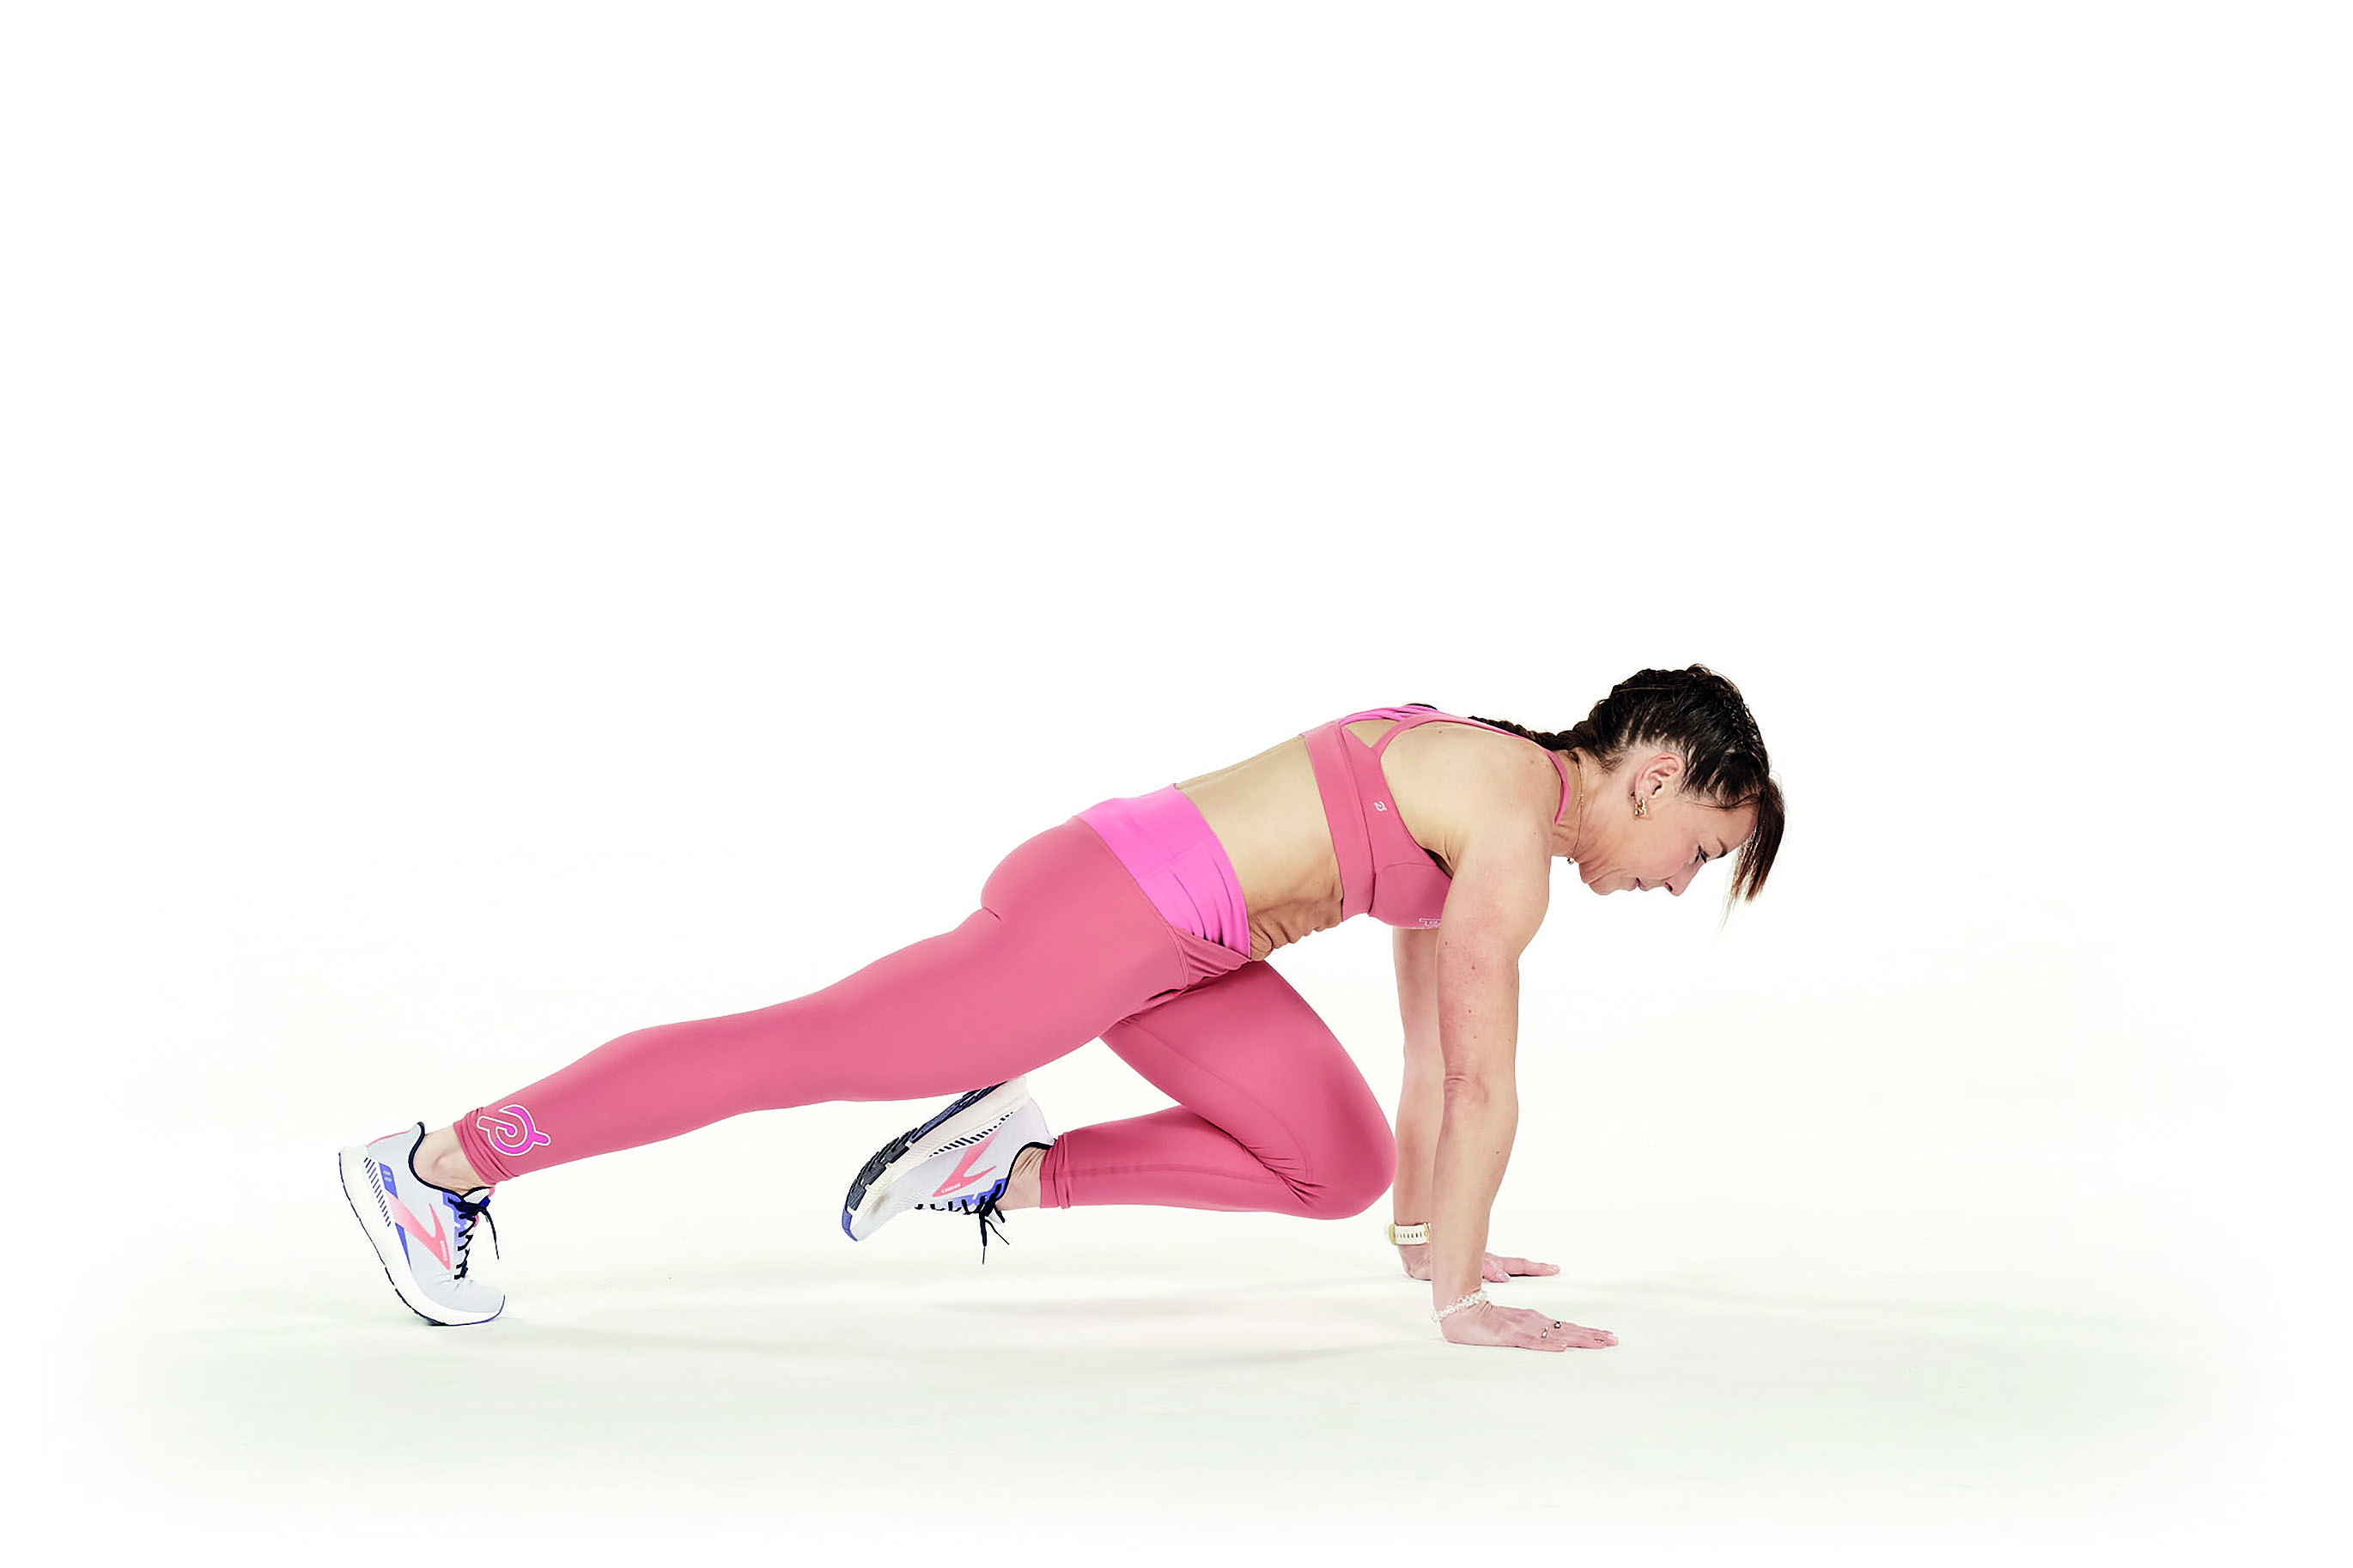 woman wearing pink activewear demonstrates how to do mountain climbers